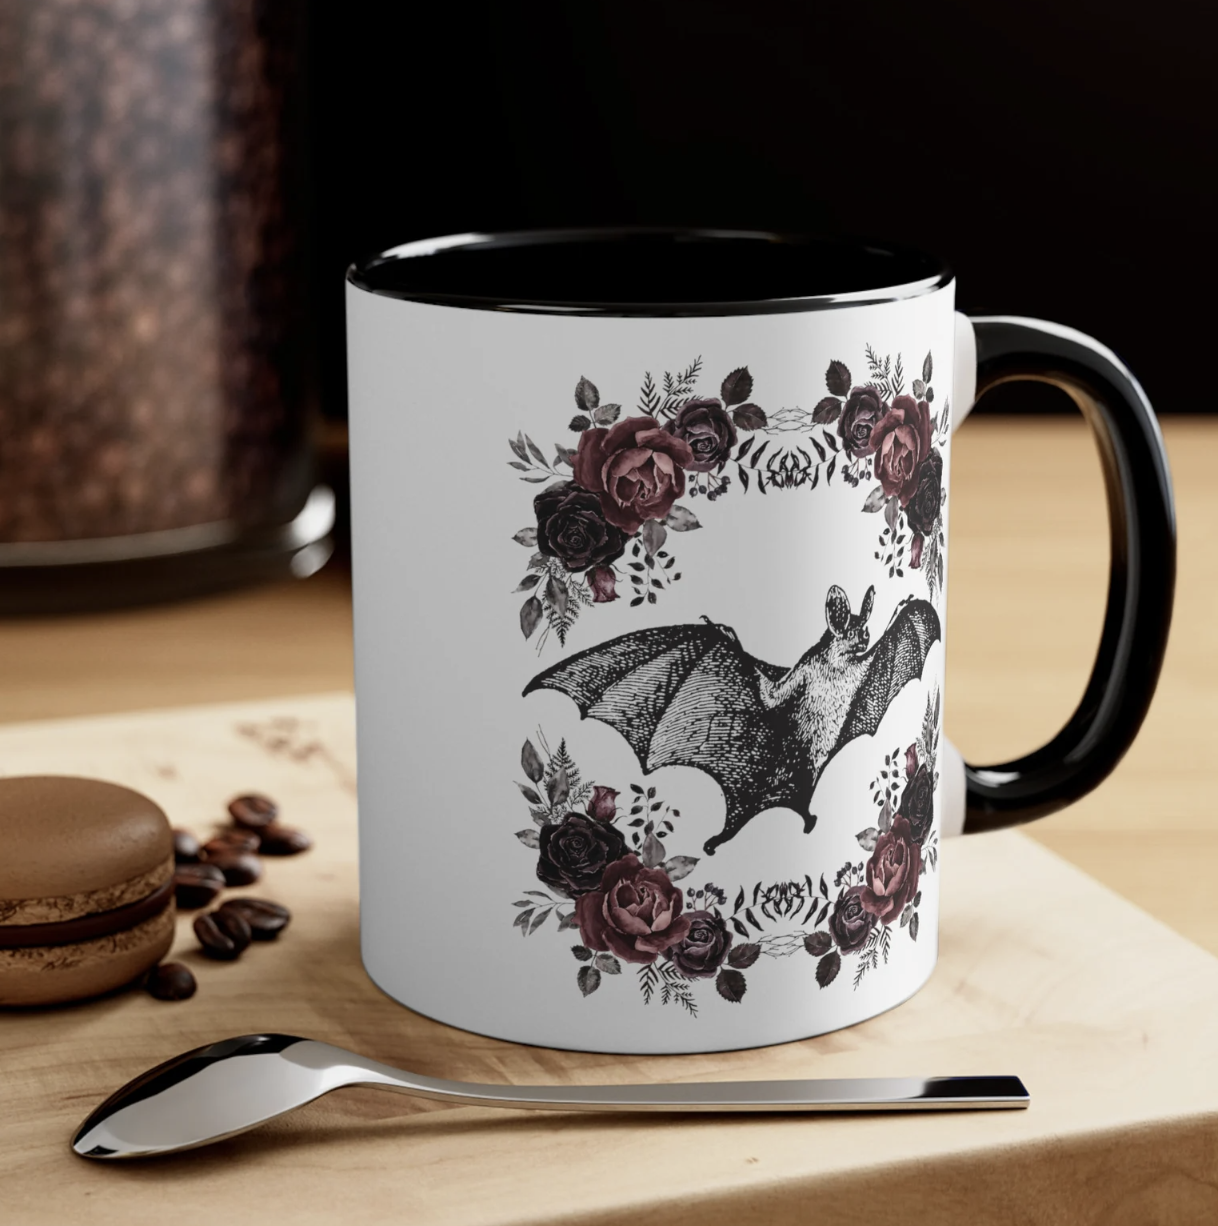 White ceramic mug with a vintage bat print surrounded by Victorian style flowers on each side